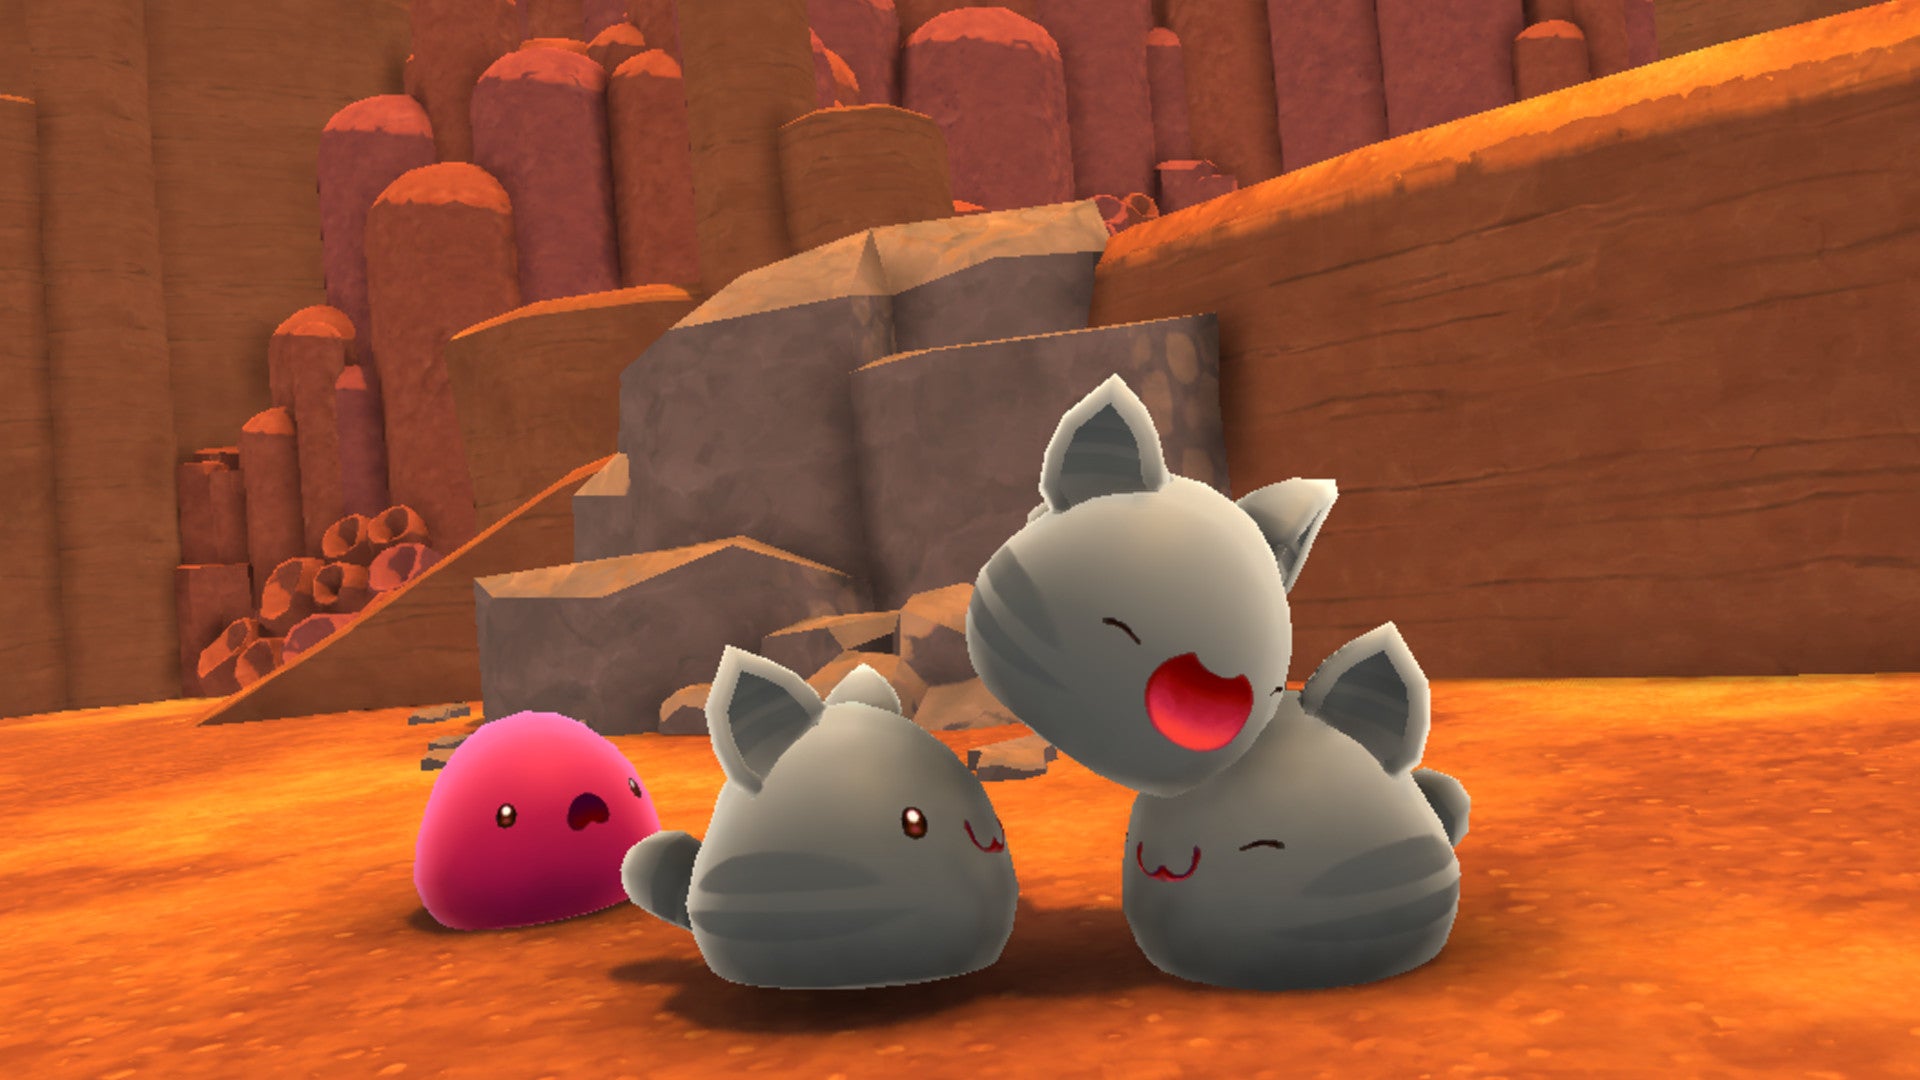 free download slime rancher 2 xbox one